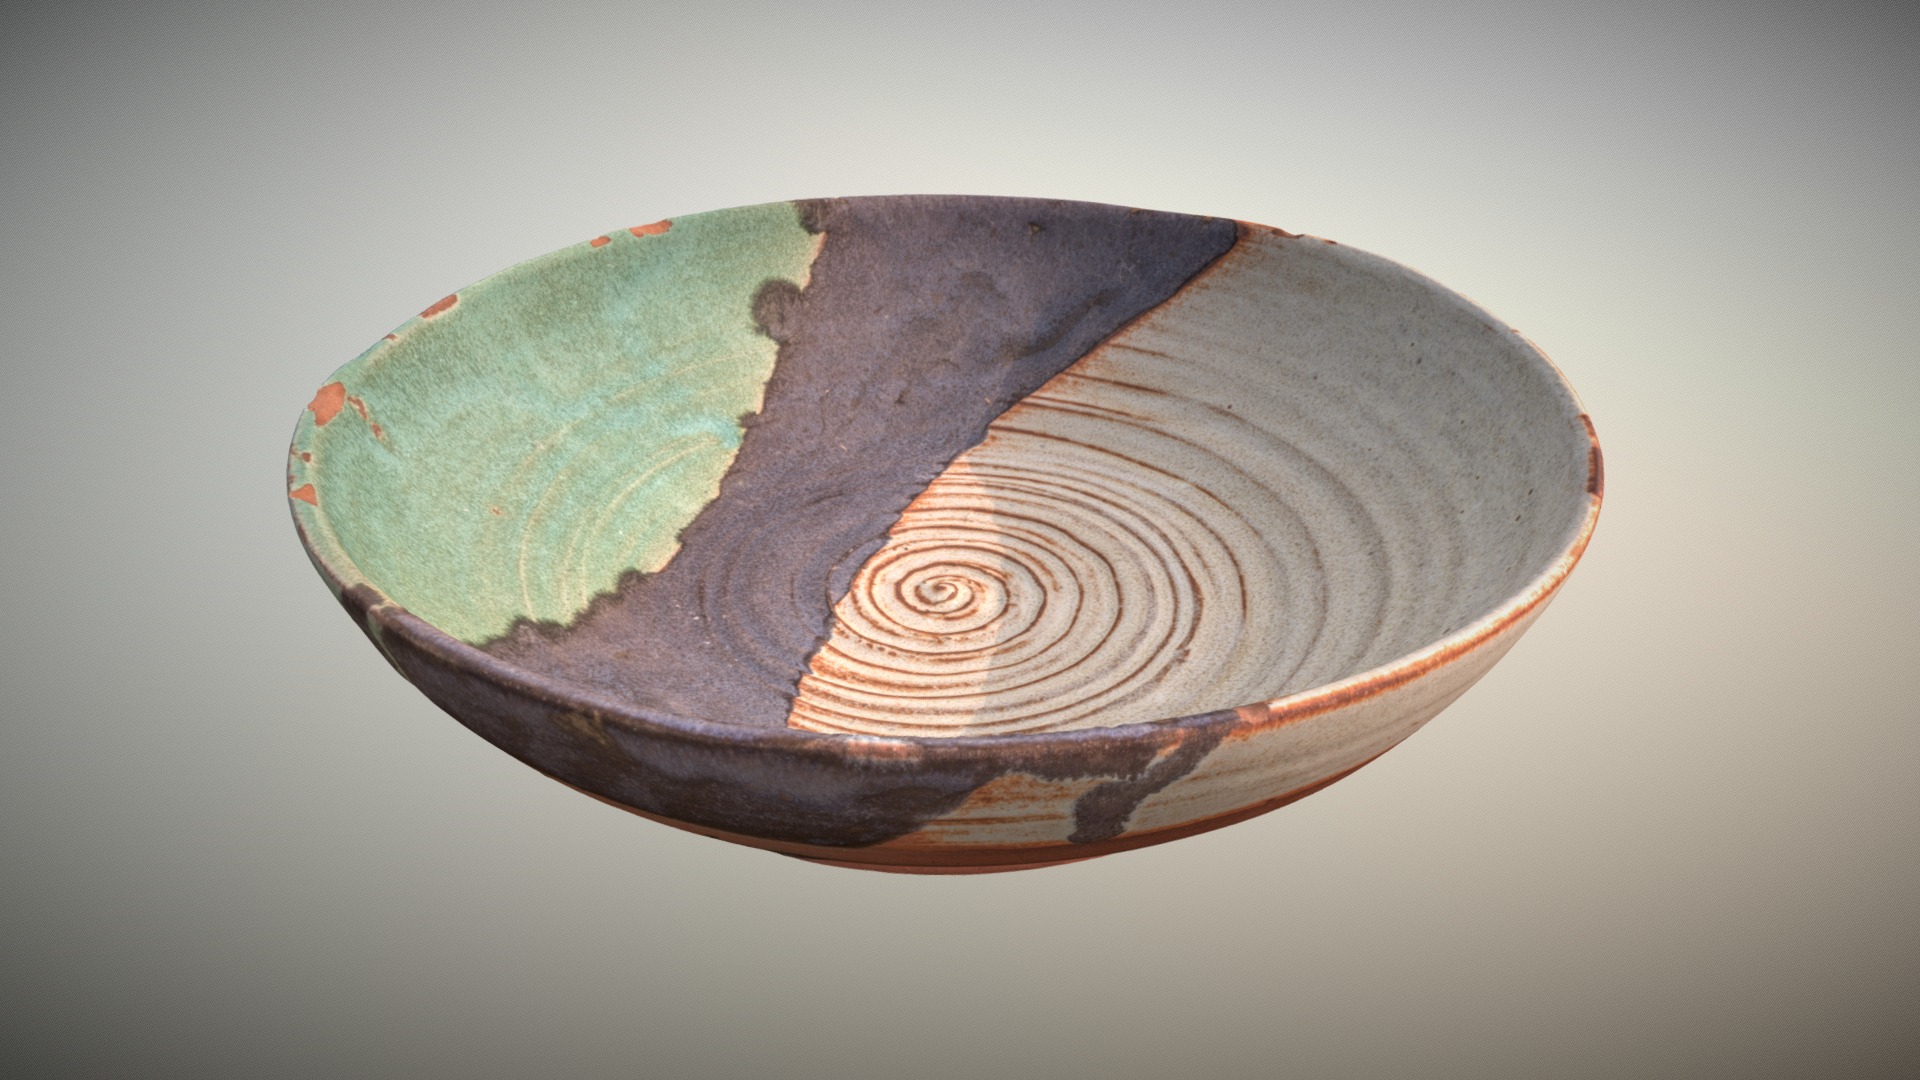 3D model Thrown Ceramic Bowl - This is a 3D model of the Thrown Ceramic Bowl. The 3D model is about a bowl with a design on it.